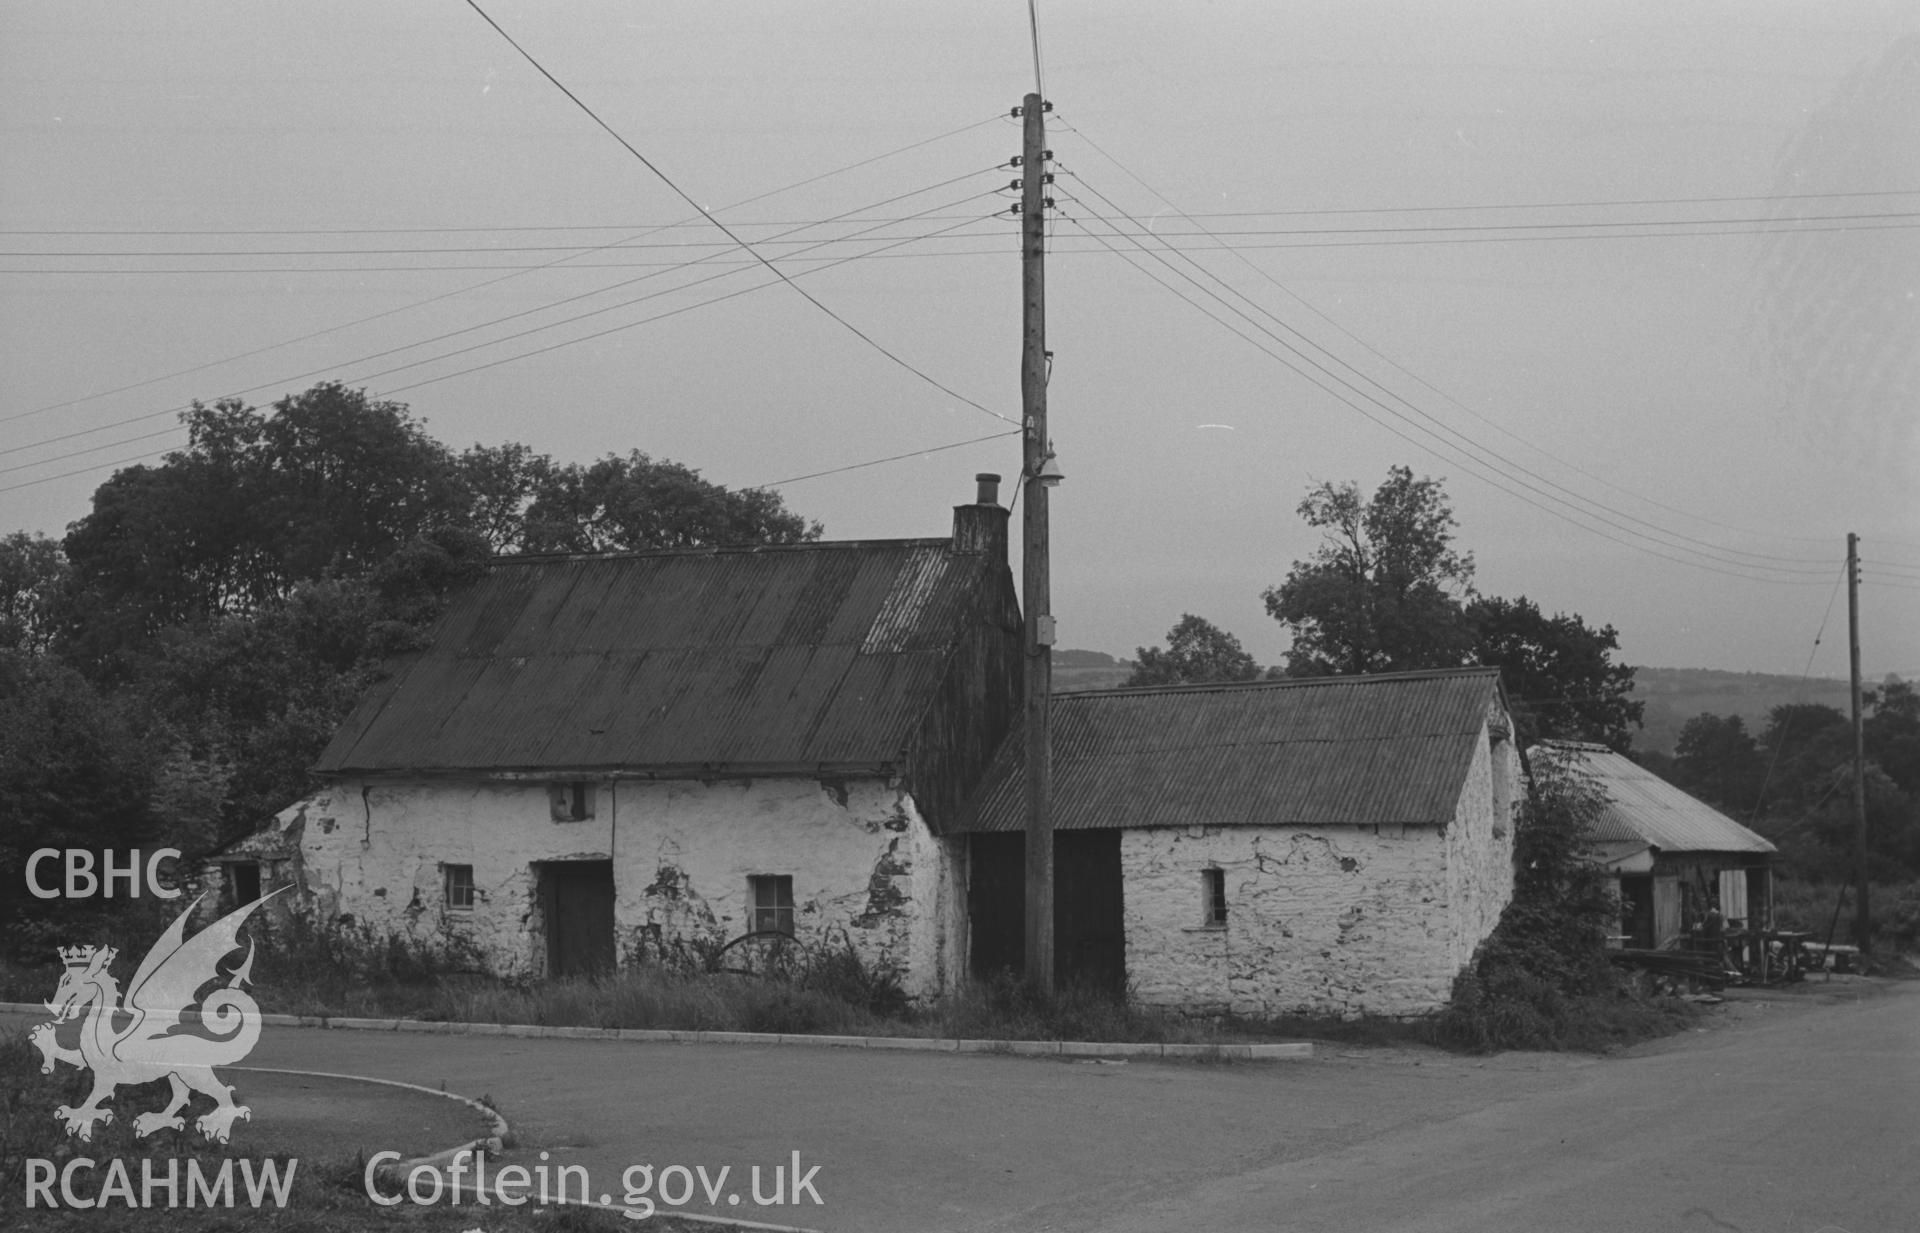 Digital copy of black & white negative showing house on side-lane on east side of the road at Talsarn, near Aberaeron. Forge on extreme right in background. Photograph by Arthur O. Chater, 5th September 1966 looking south from Grid Reference SN 545 563.